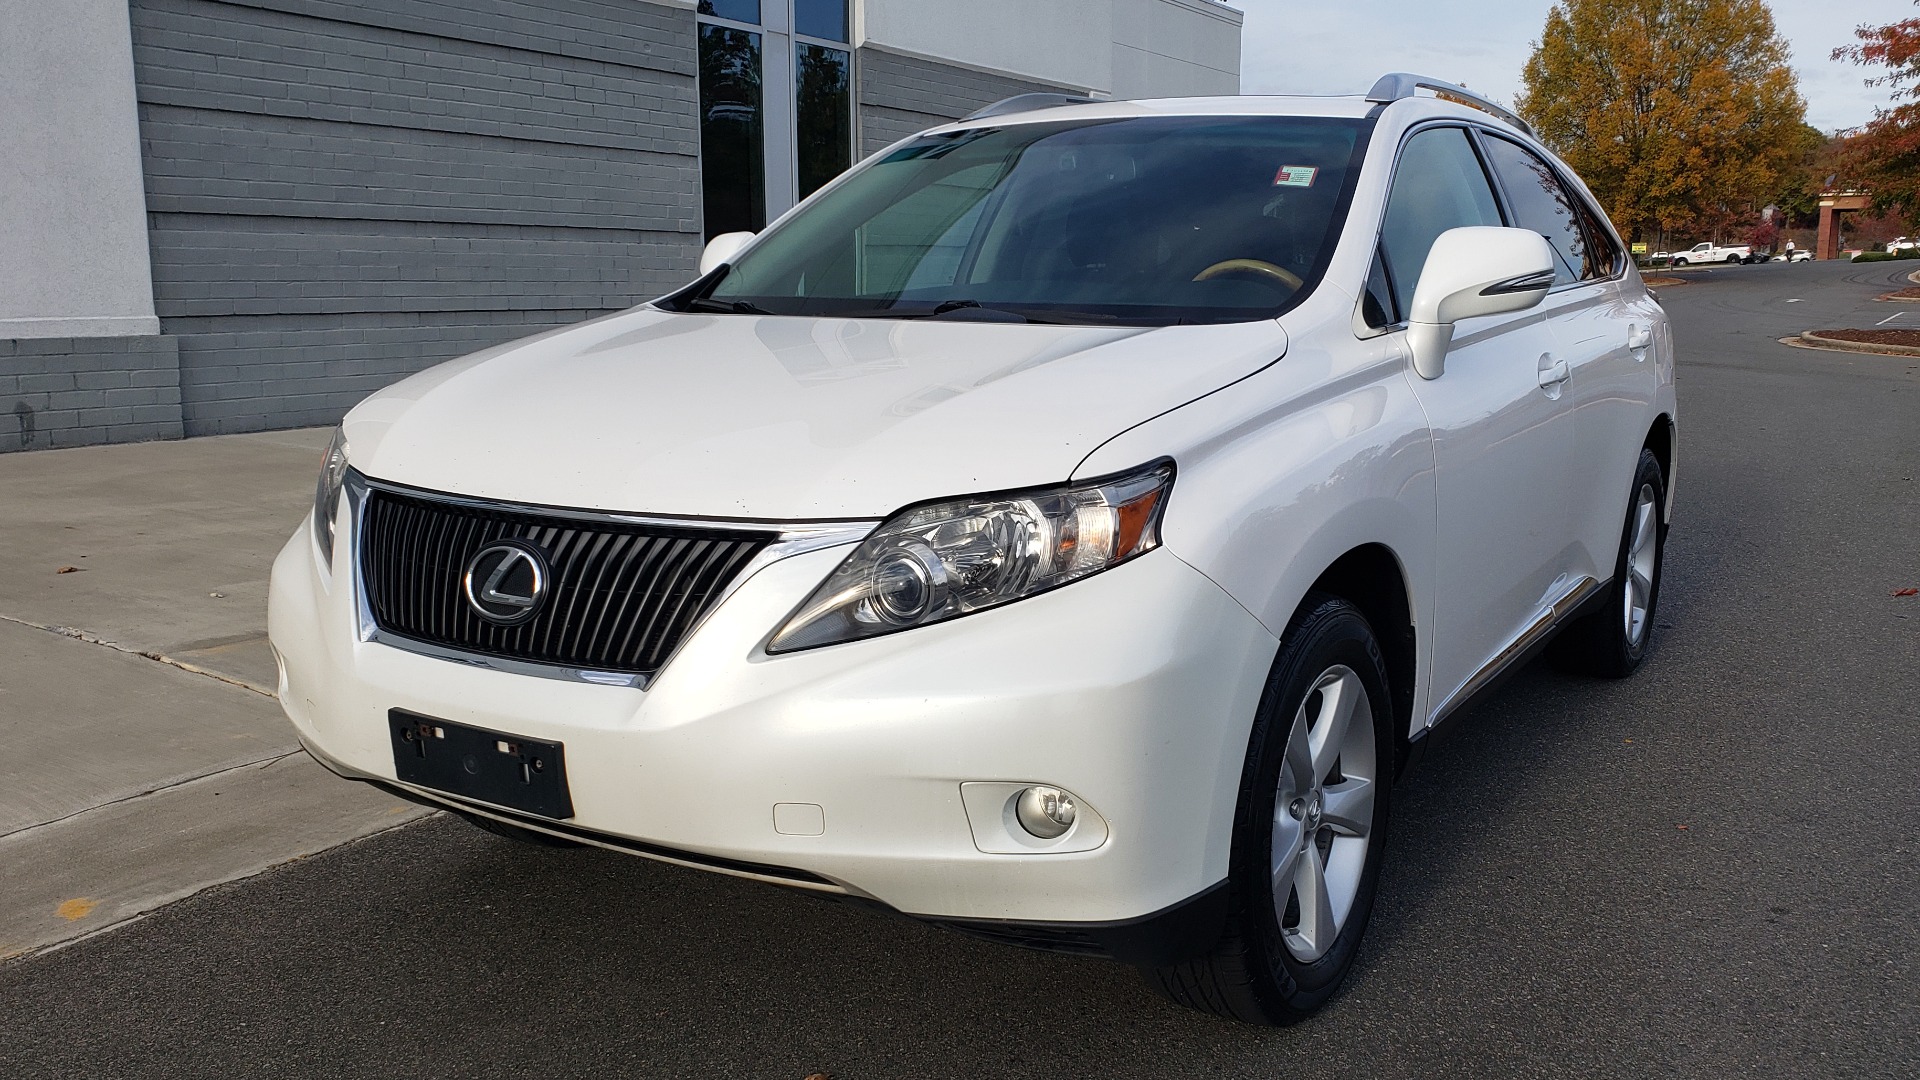 Used 2011 Lexus RX 350 5-DR SUV AWD / PREMIUM / COMFORT / TOWING / PREM AUDIO / NAV for sale Sold at Formula Imports in Charlotte NC 28227 1